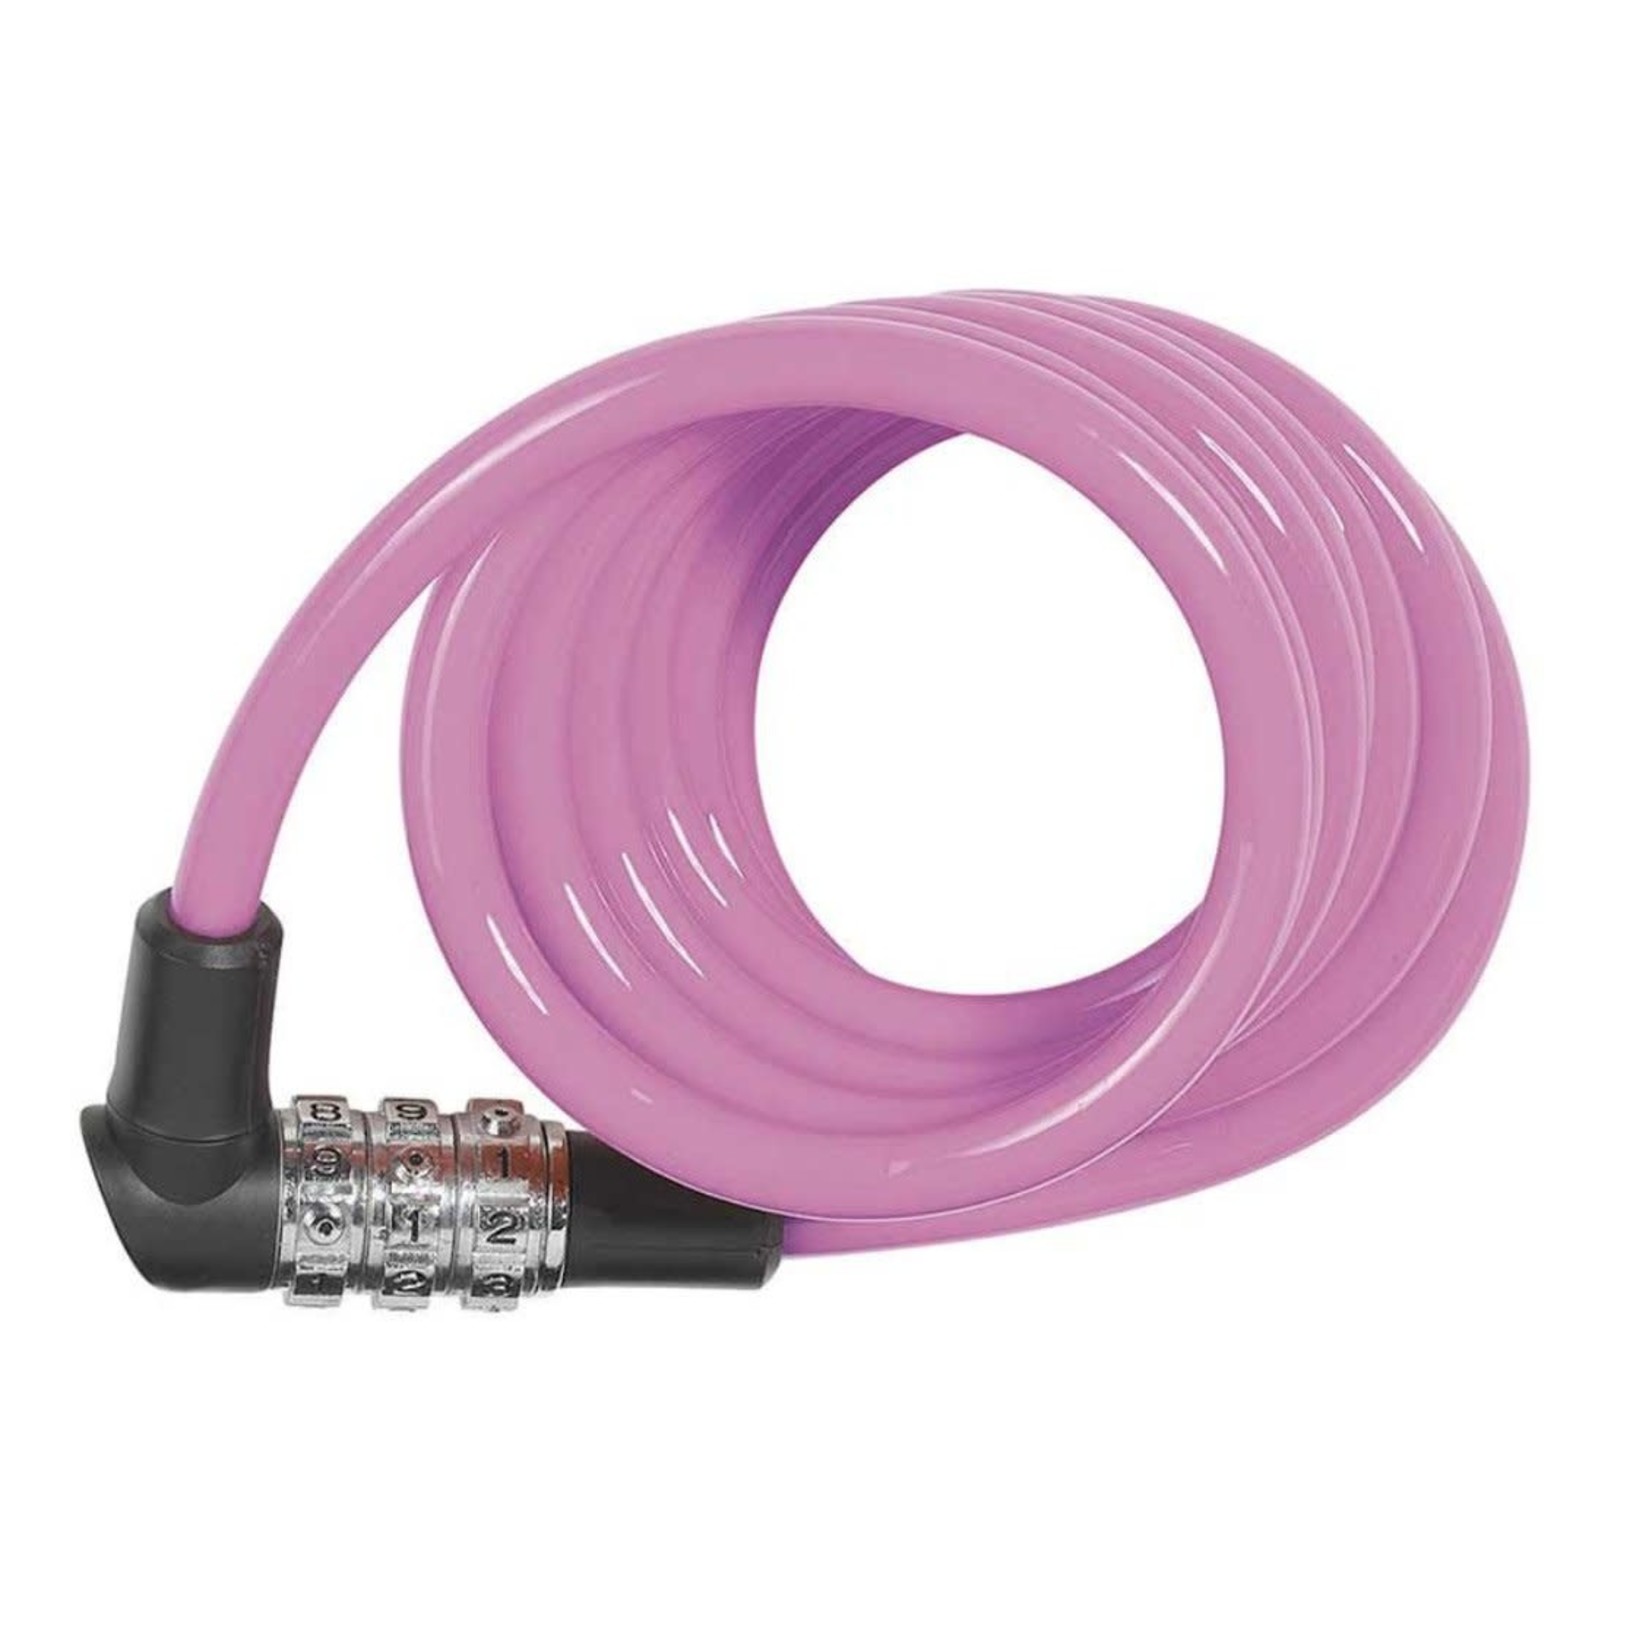 Abus Abus Kids Cable Lock